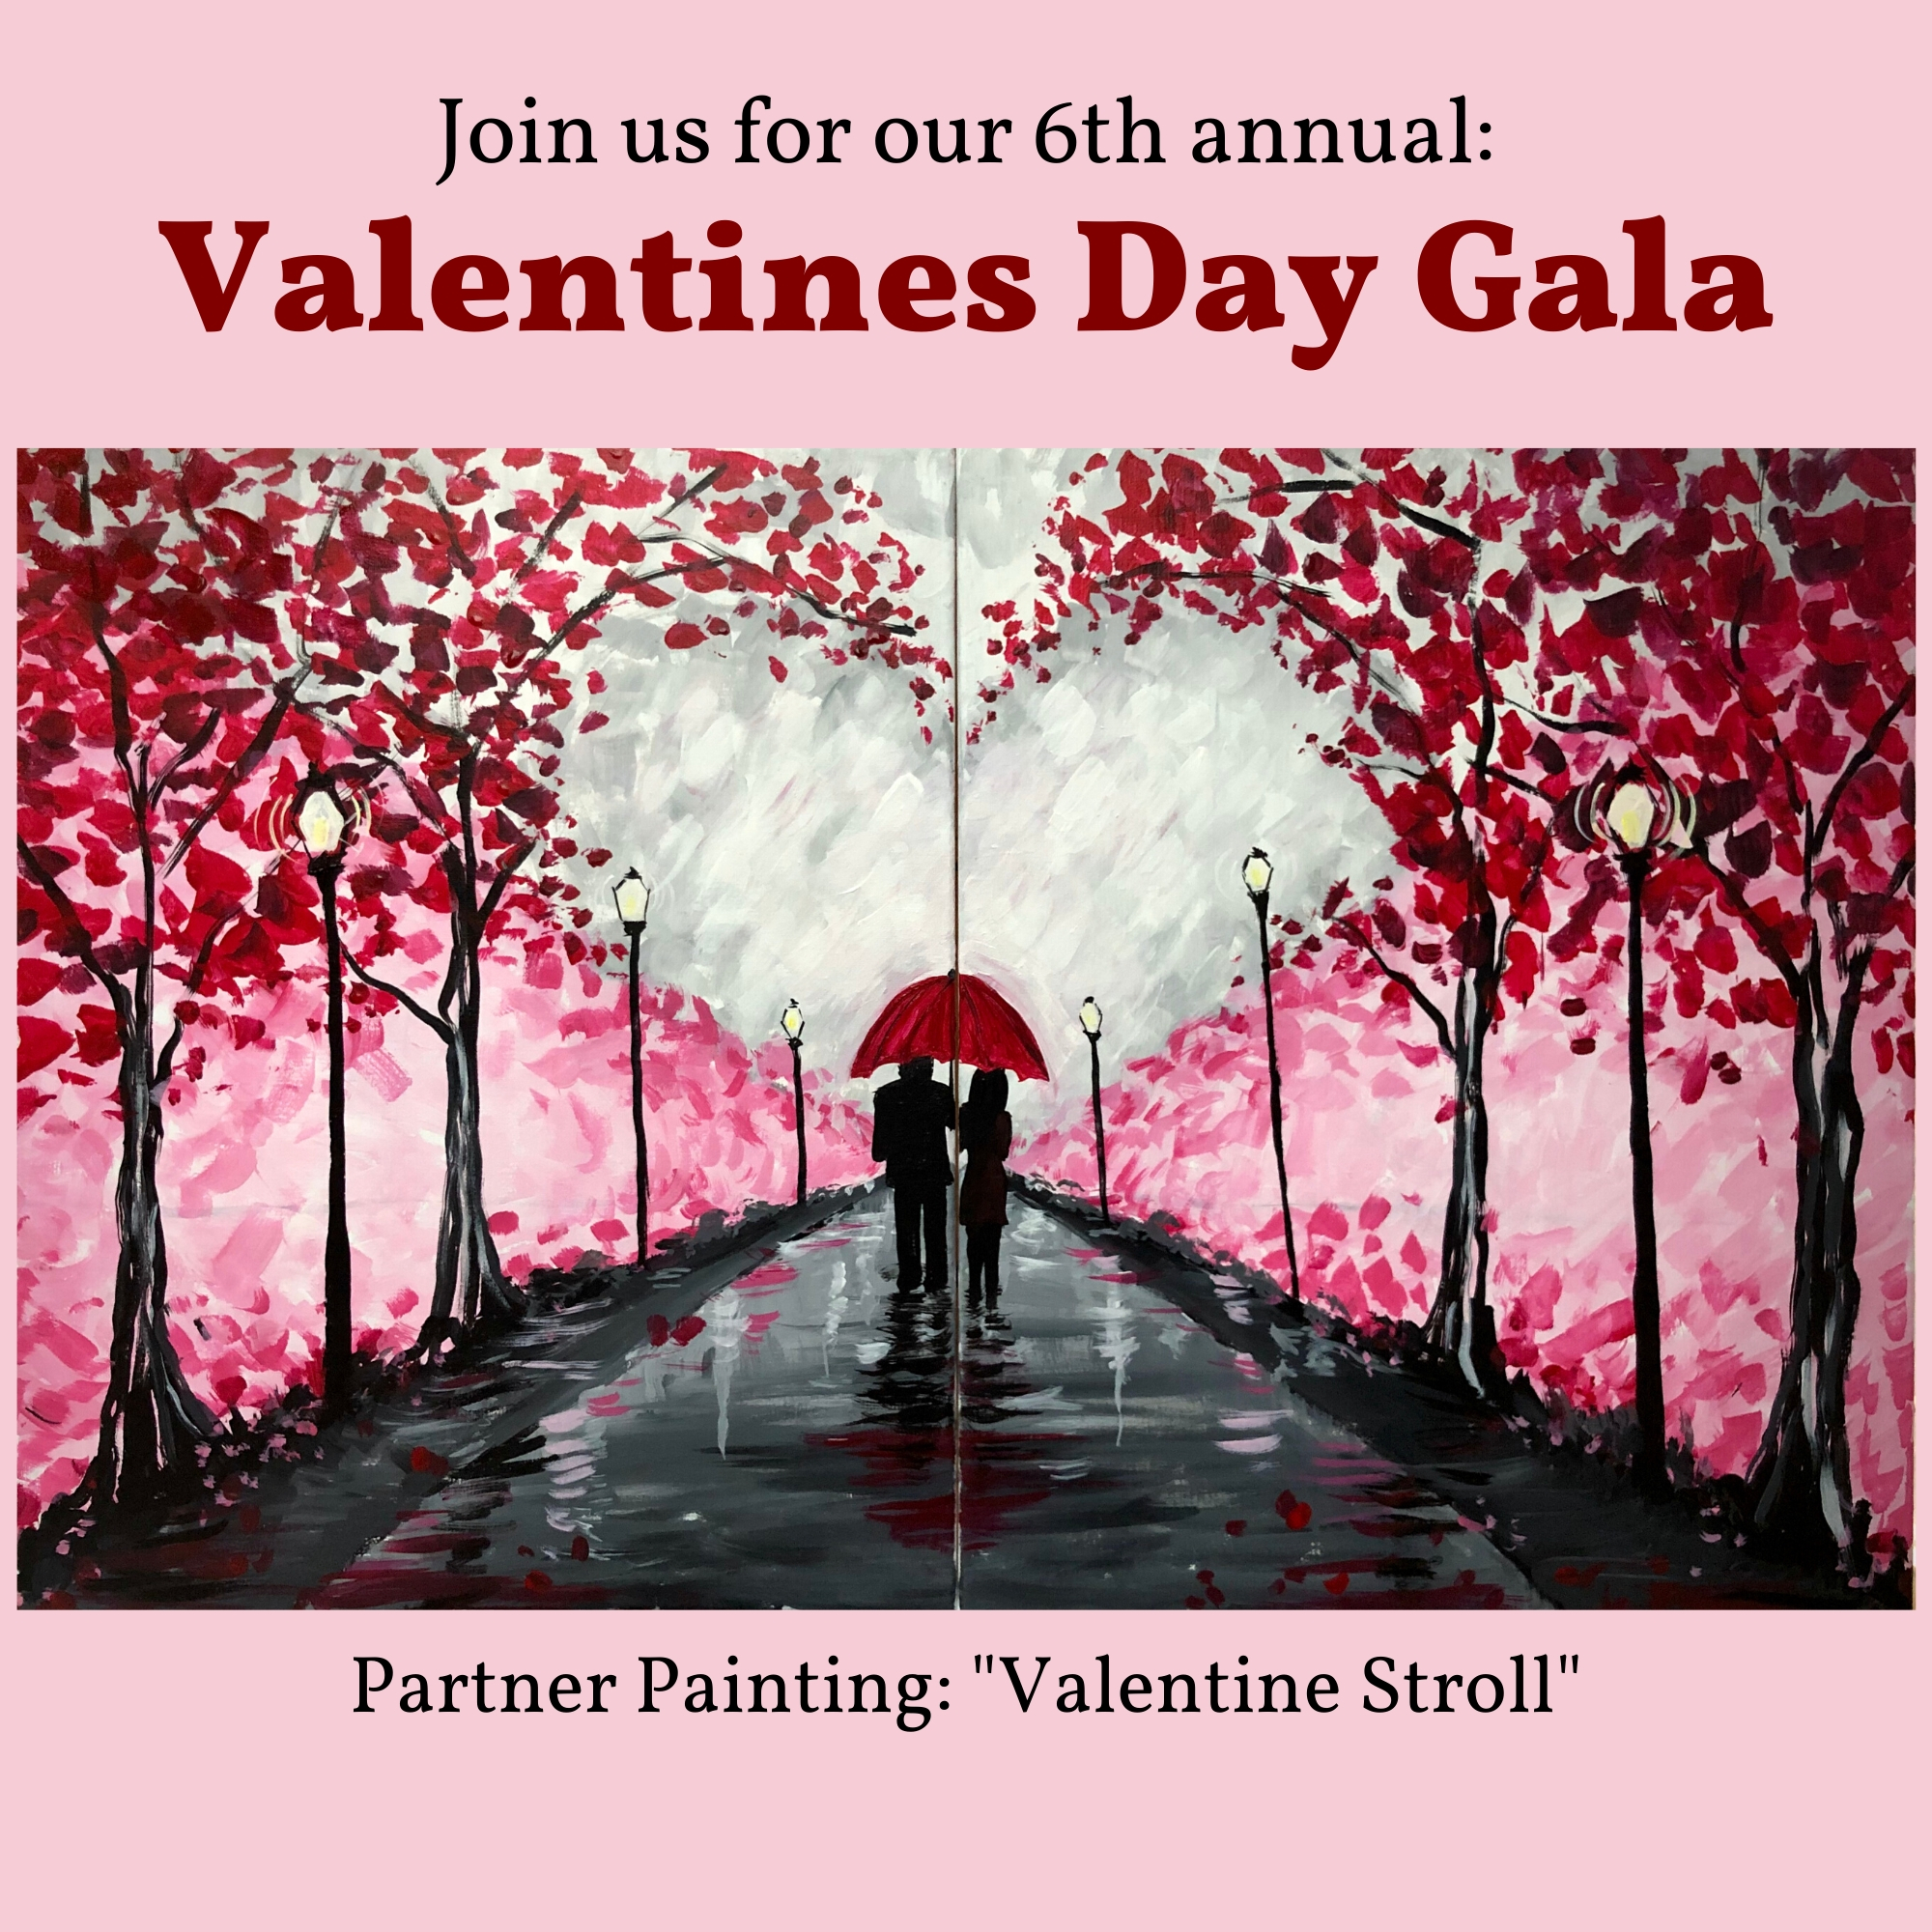 A Valentines Day Gala Valentine Stroll experience project by Yaymaker